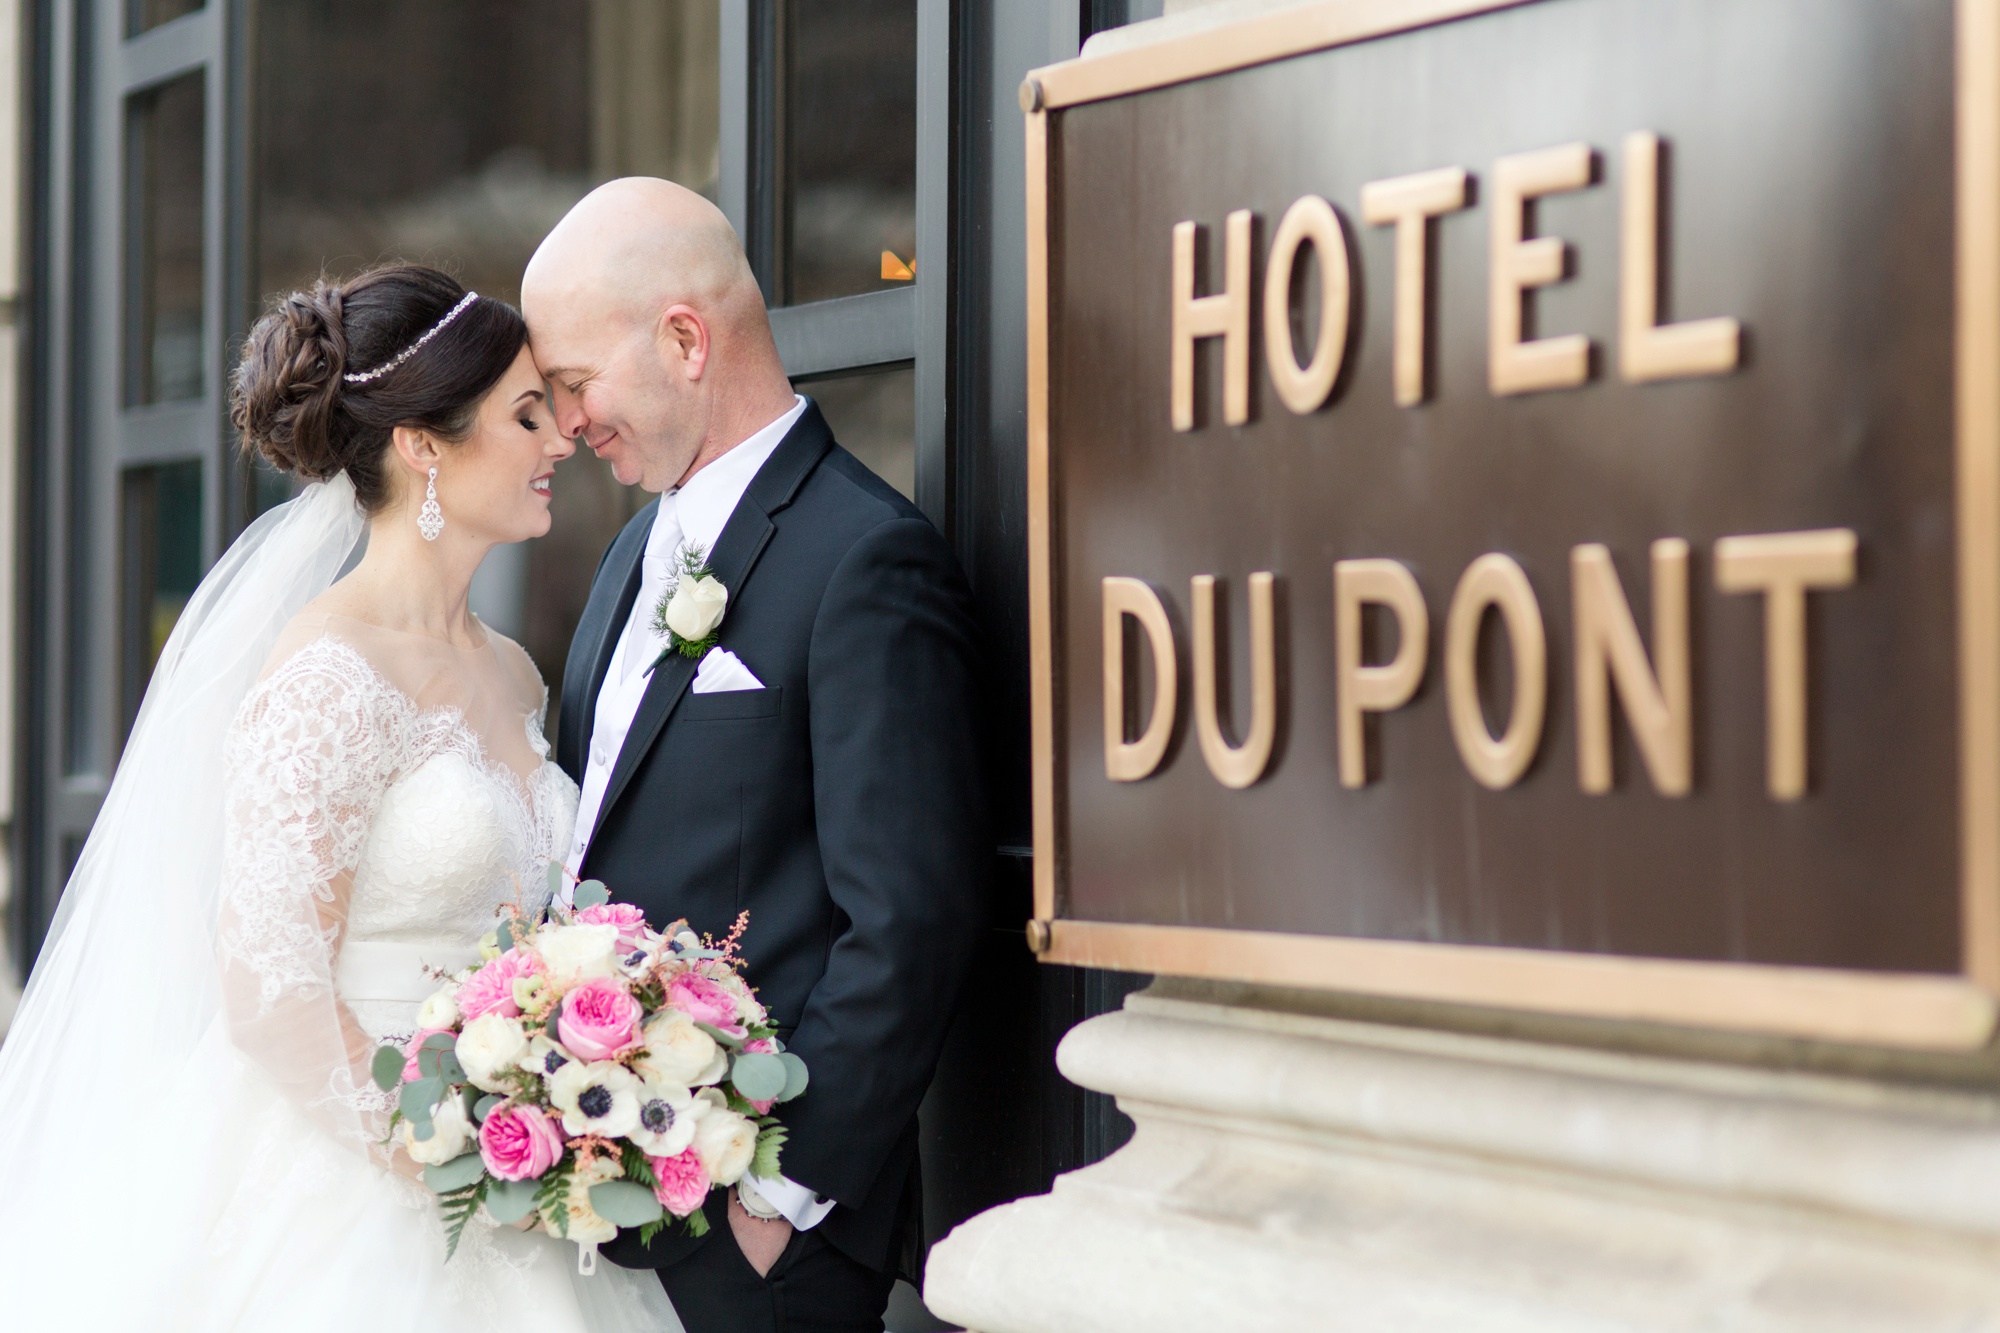 Bride and Groom at Hotel Dupont Sign